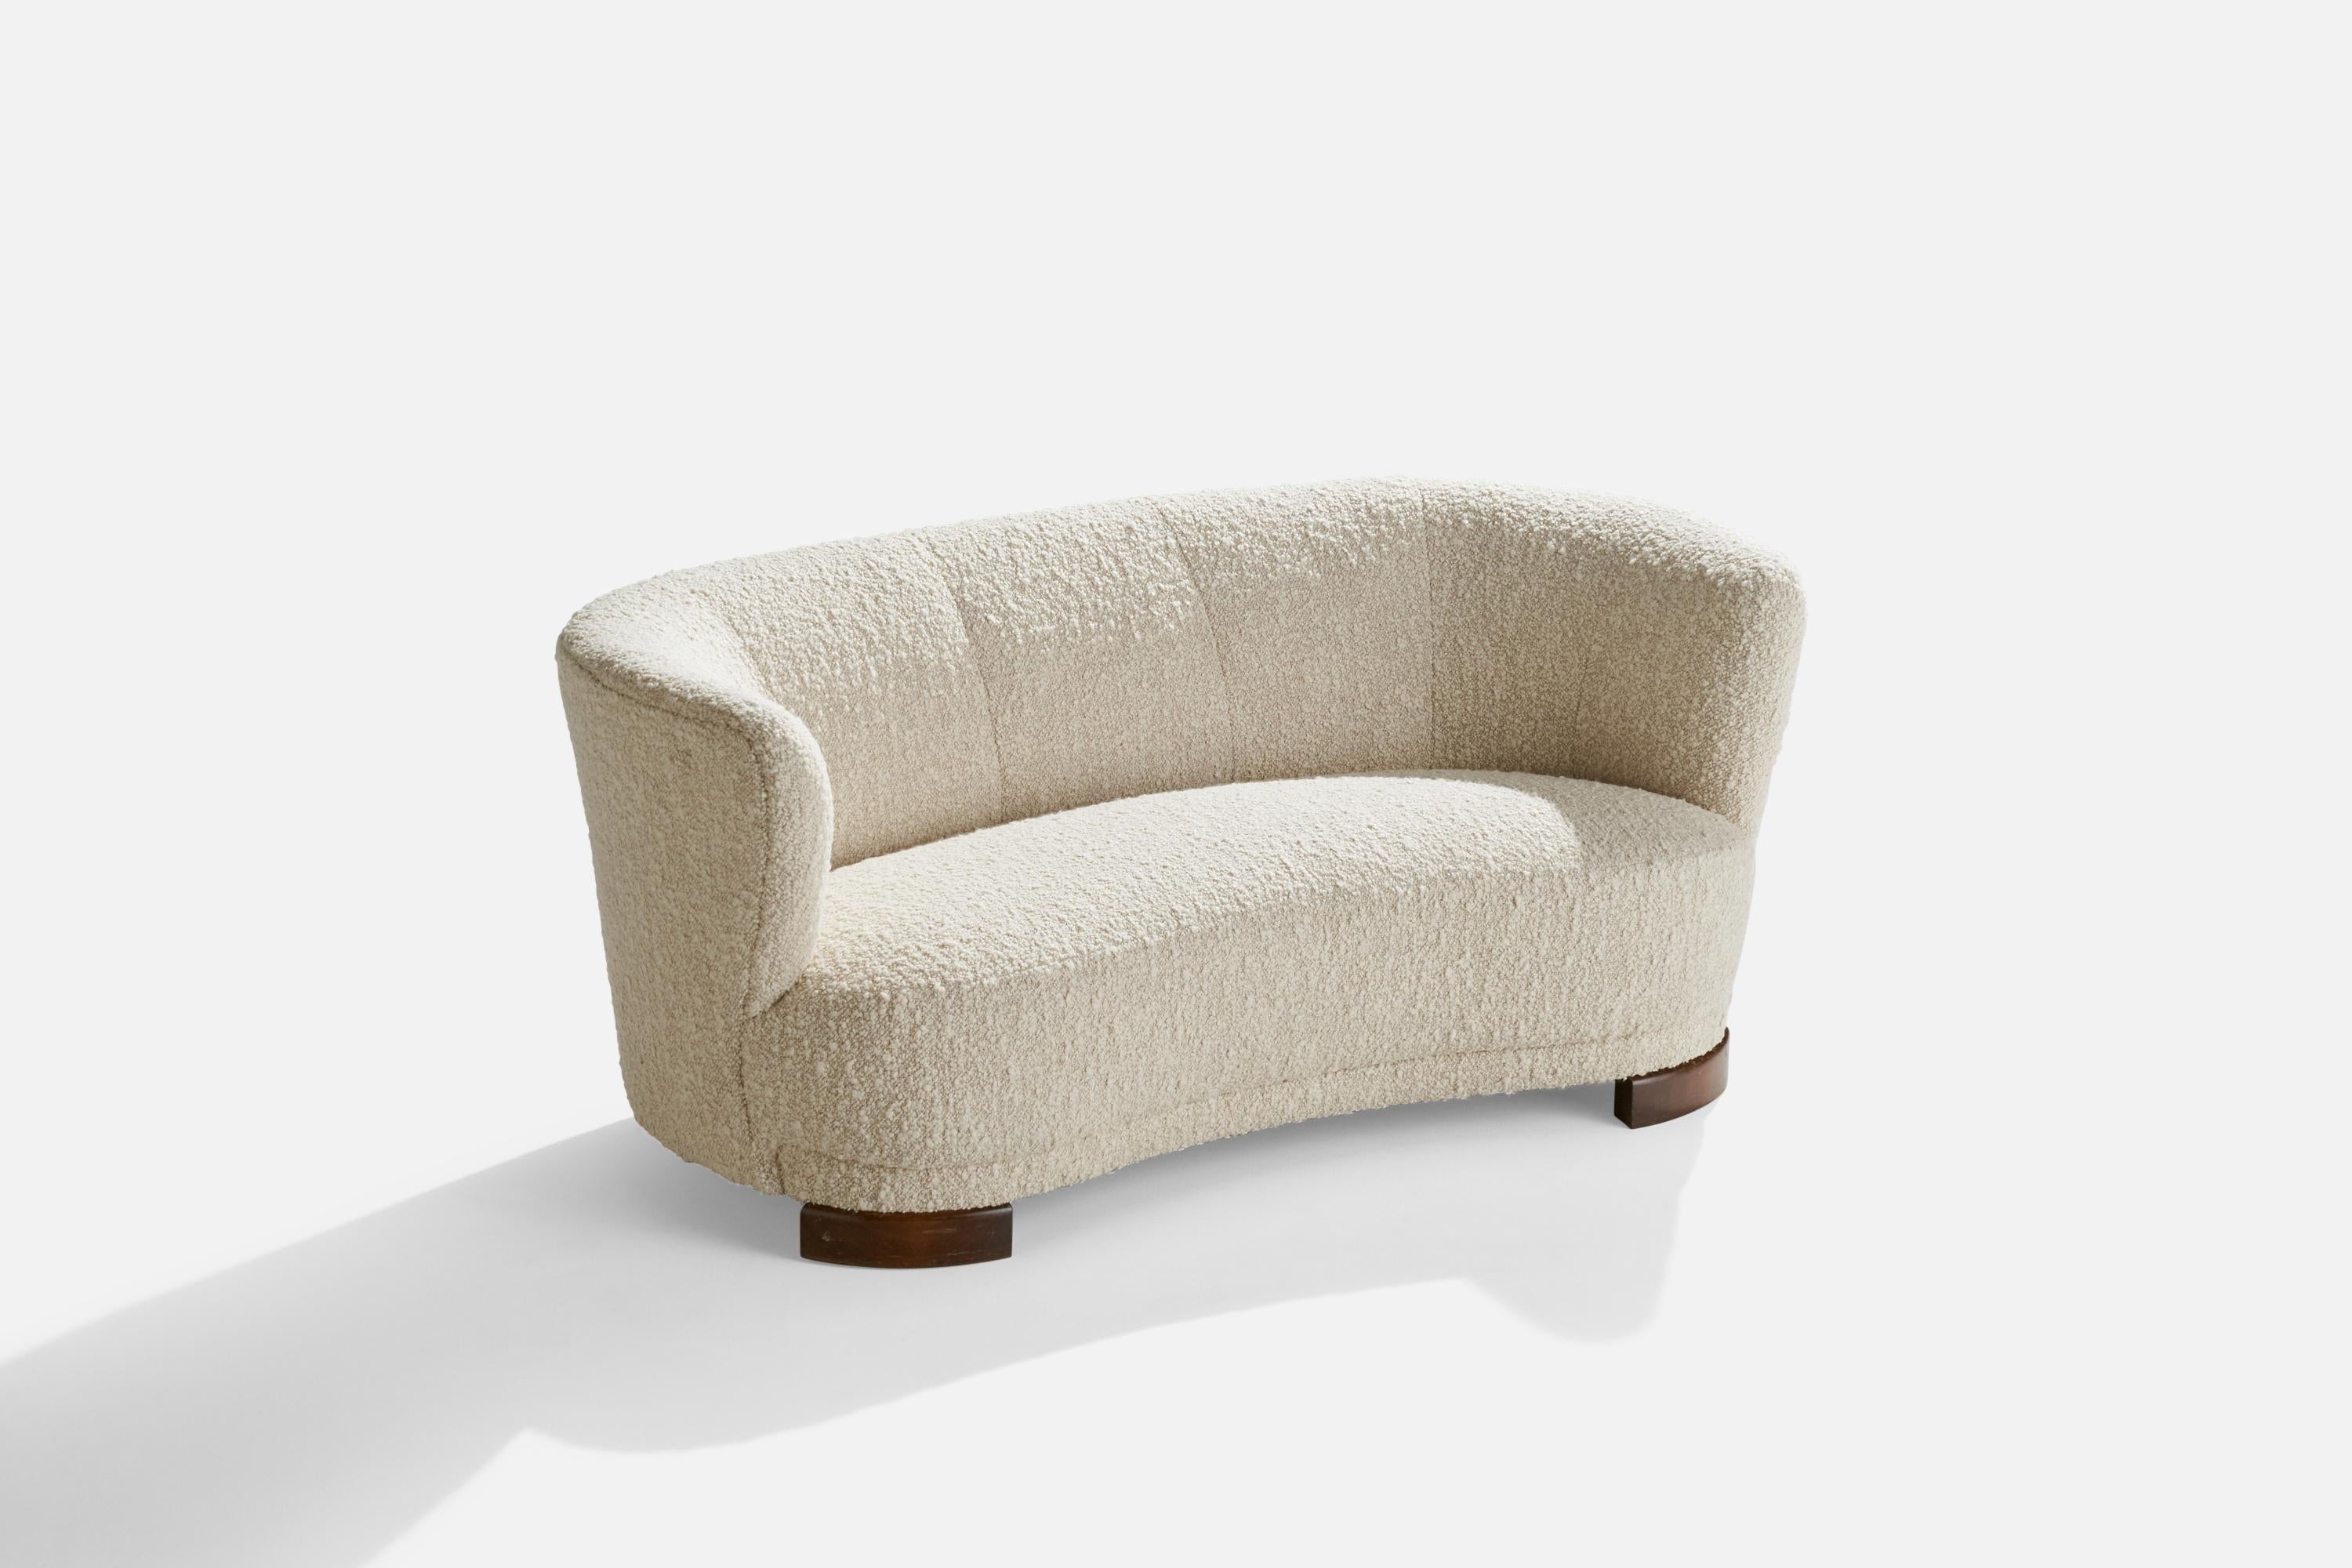 An off-white bouclé fabric and dark-stained wood sofa designed and produced in Denmark, 1940s.

Seat height: 14”